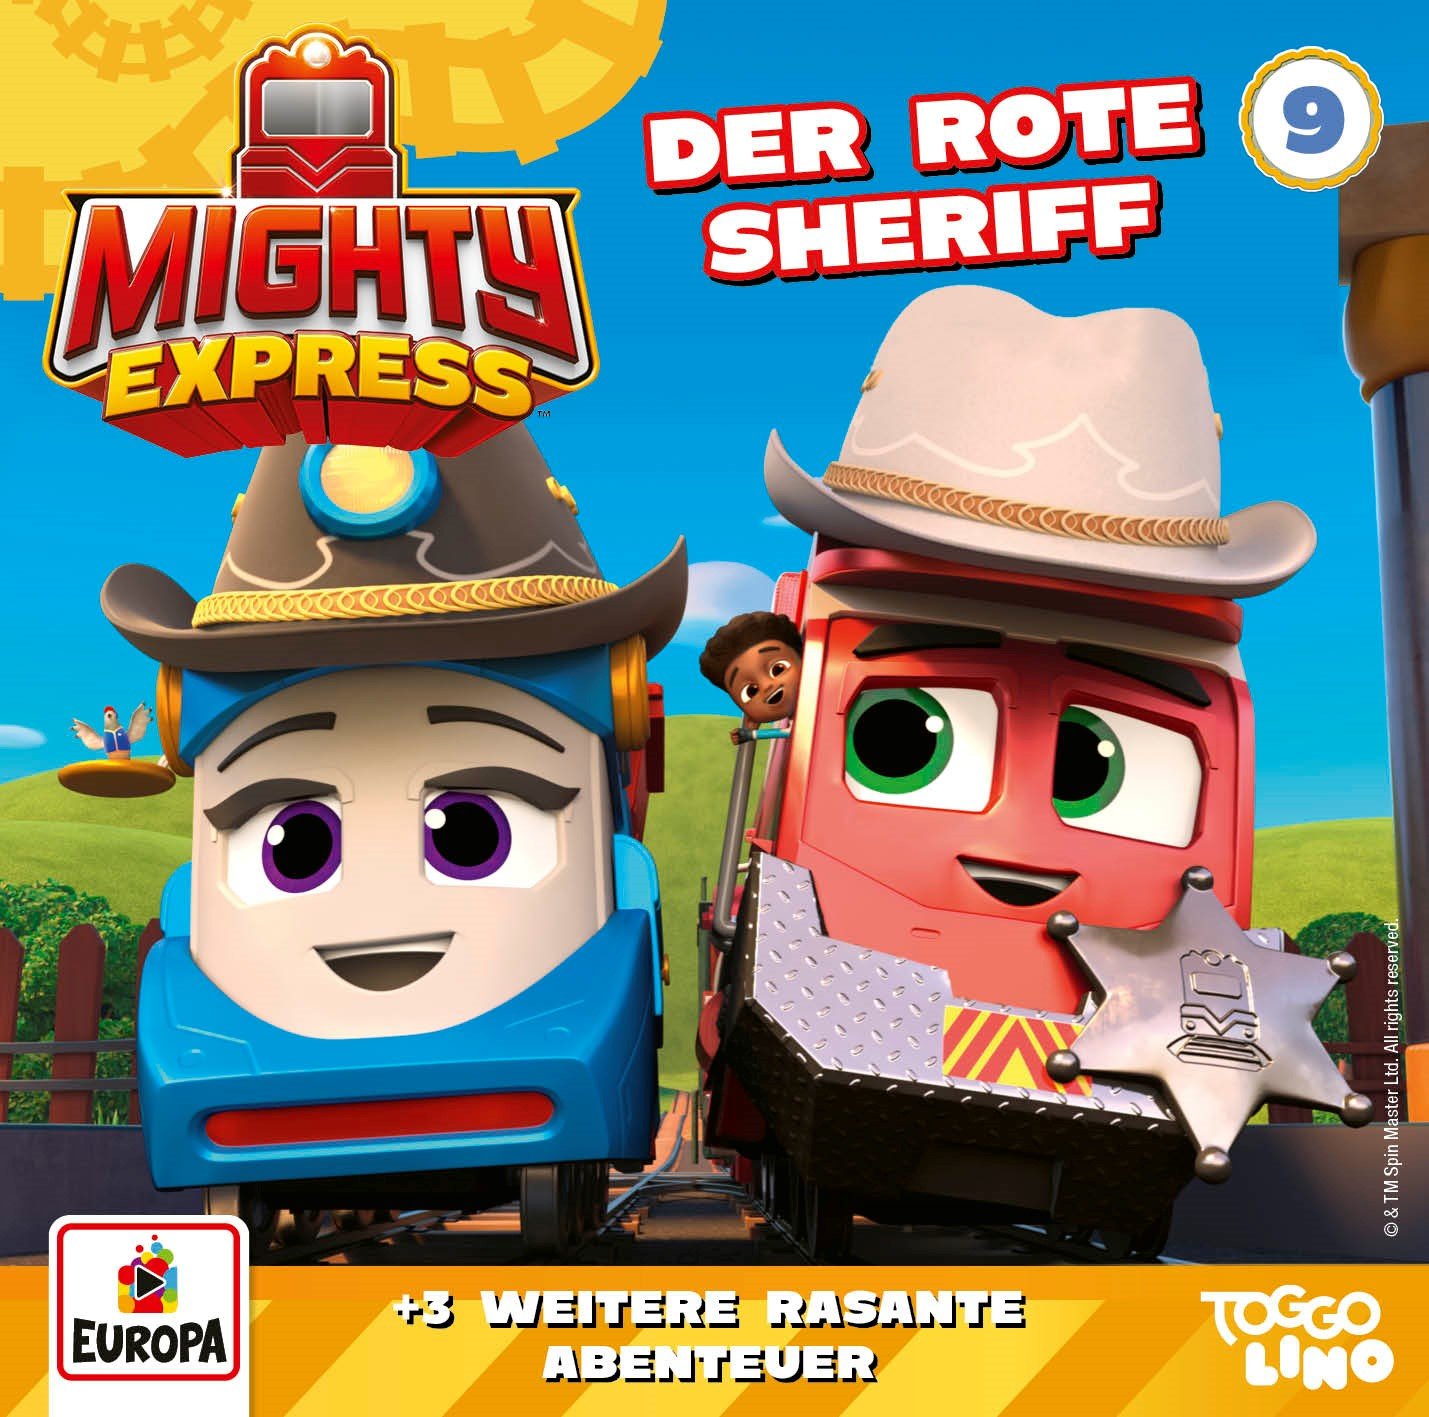 Mighty Express: Der rote Sheriff